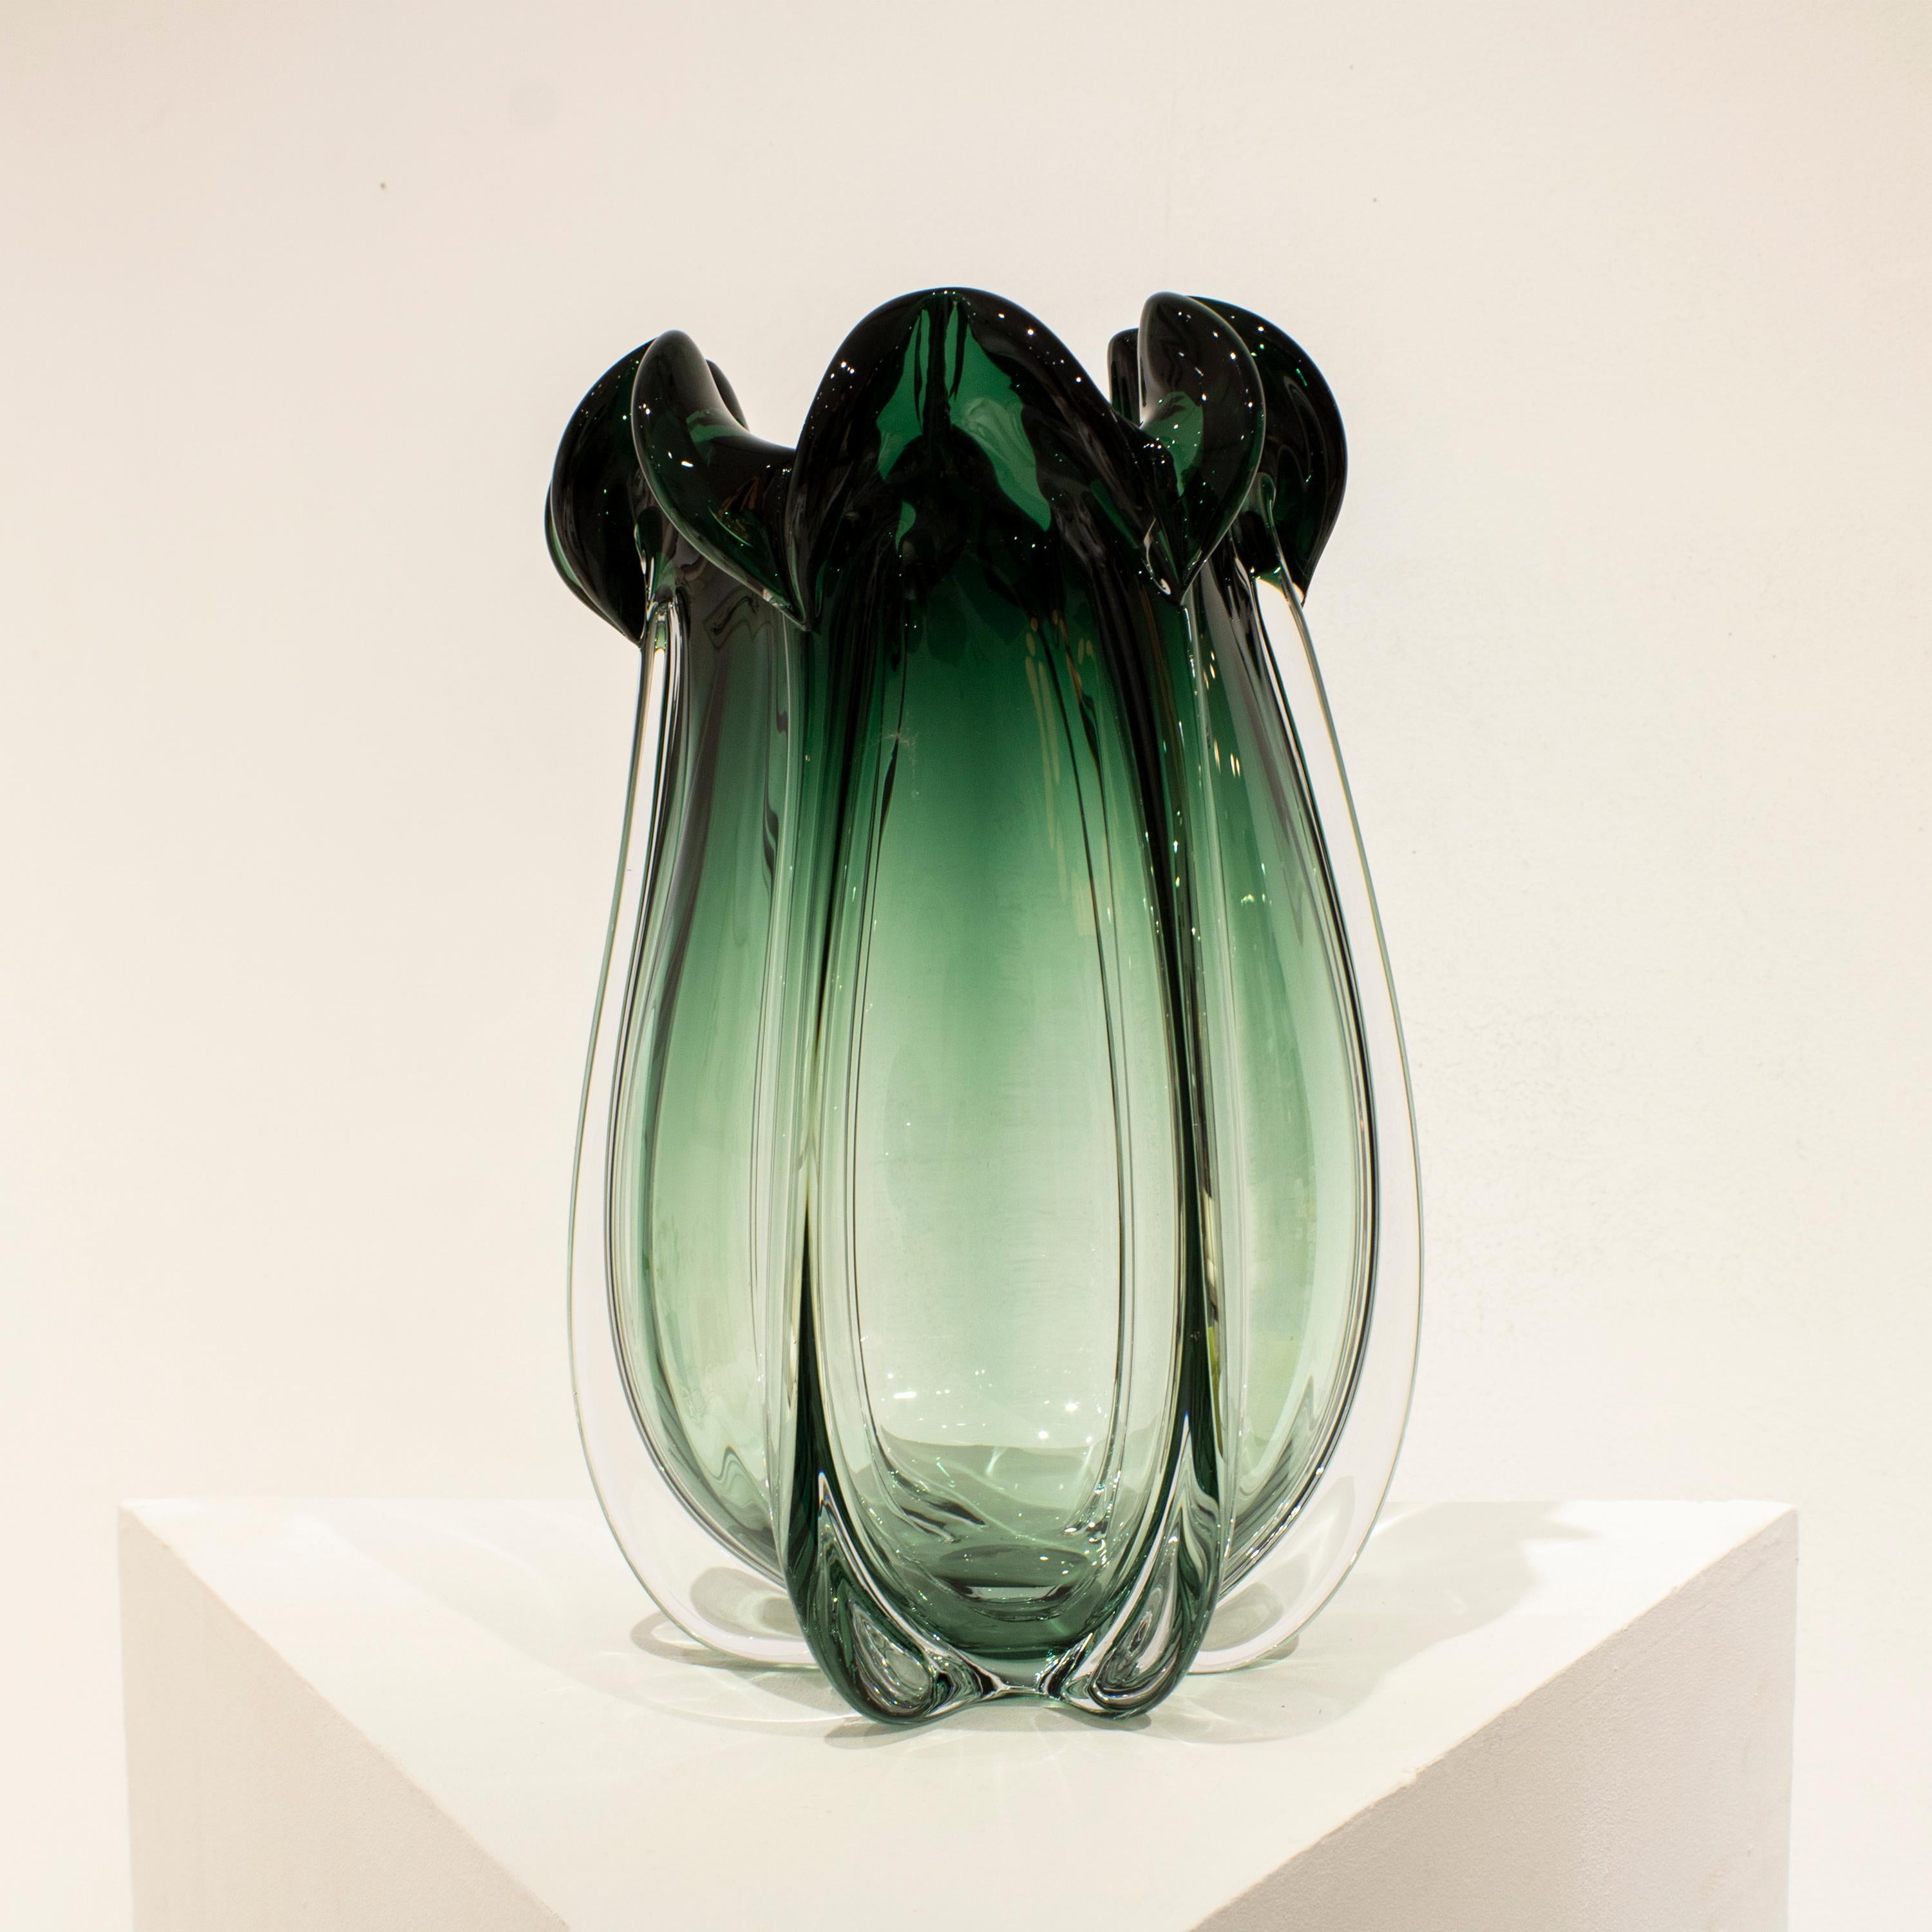 Hand-blown Italian green semi-transparent glass vase, with organic shapes inspired by nature. 